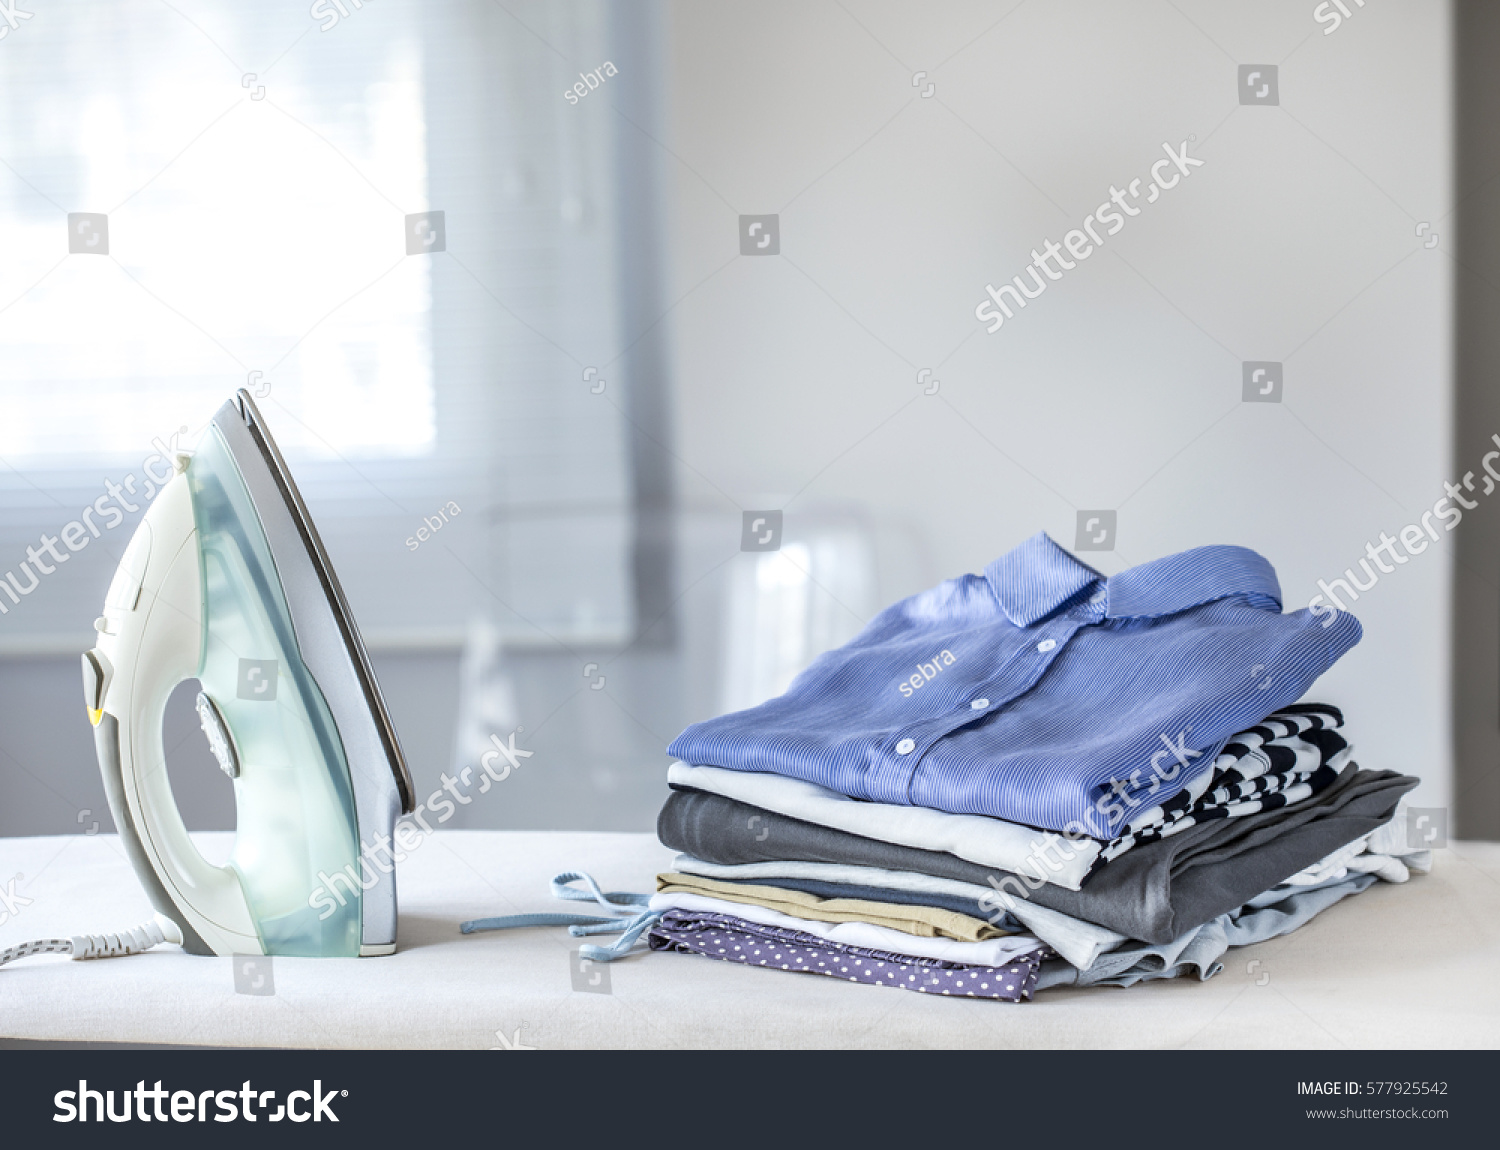 Ironing clothes on ironing board #577925542